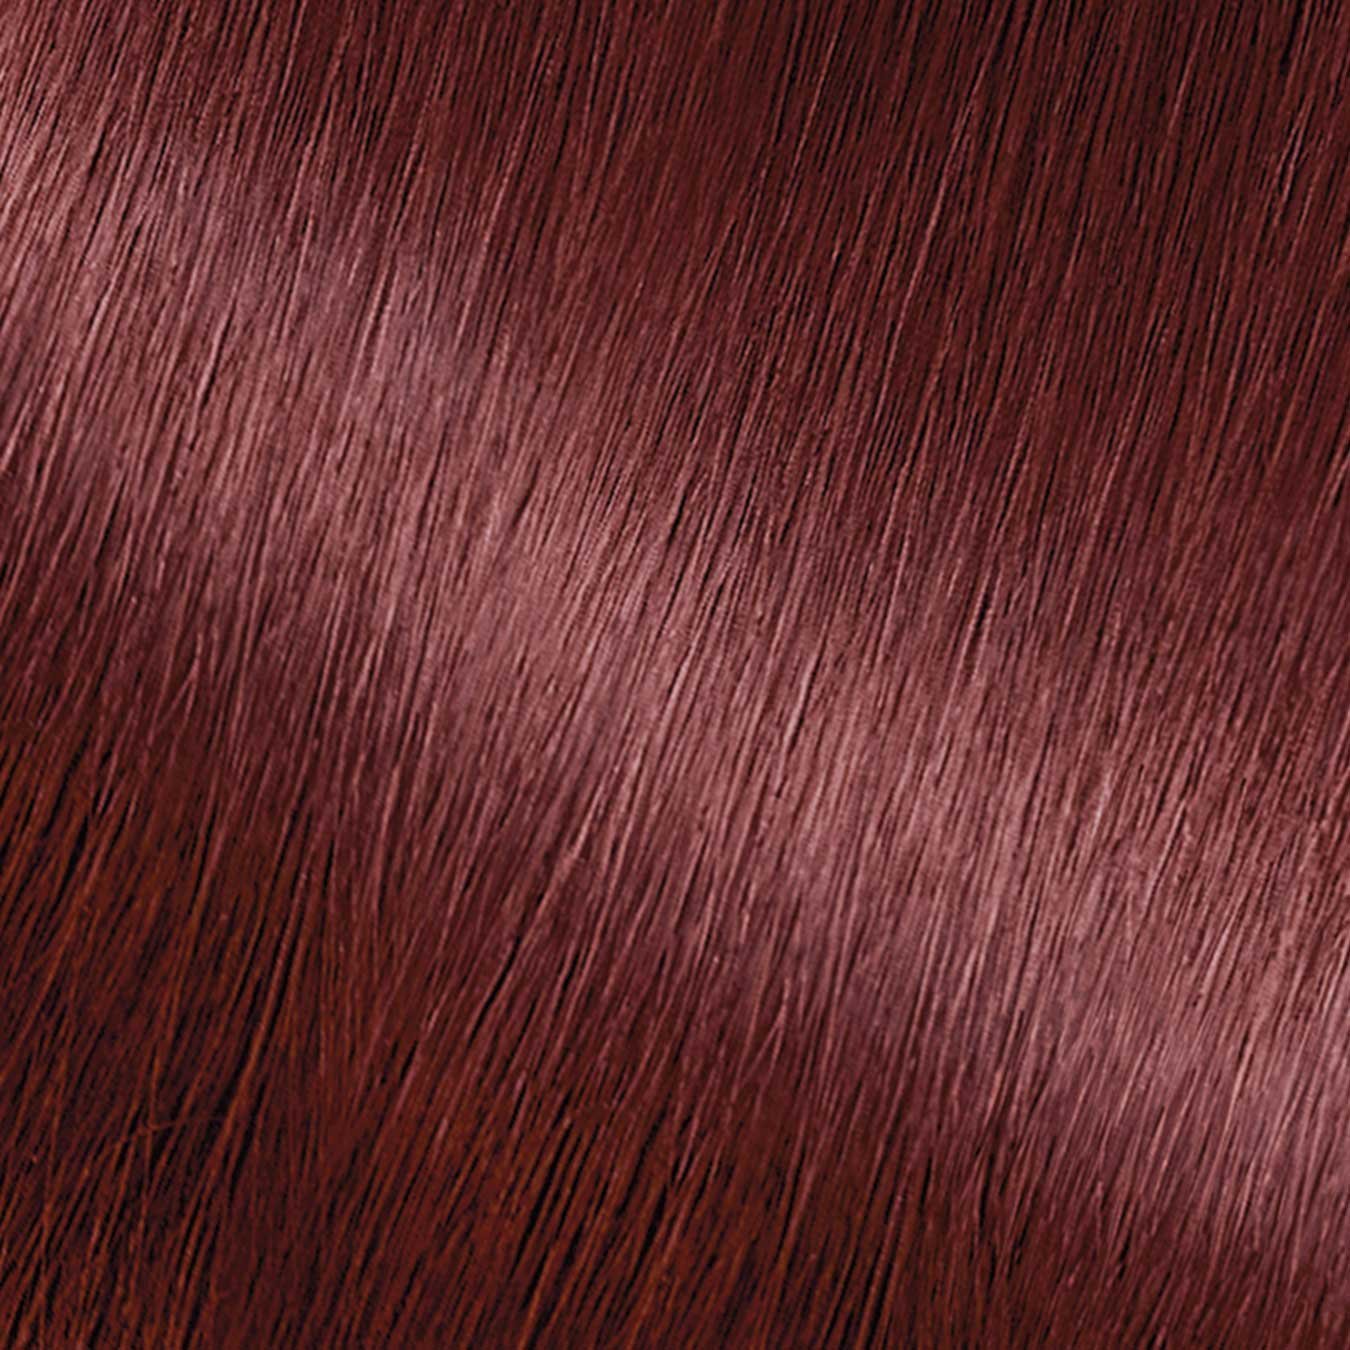 Hair Swatch of Nutrisse Ultra Coverage 550 Cinnamon Whiskey.